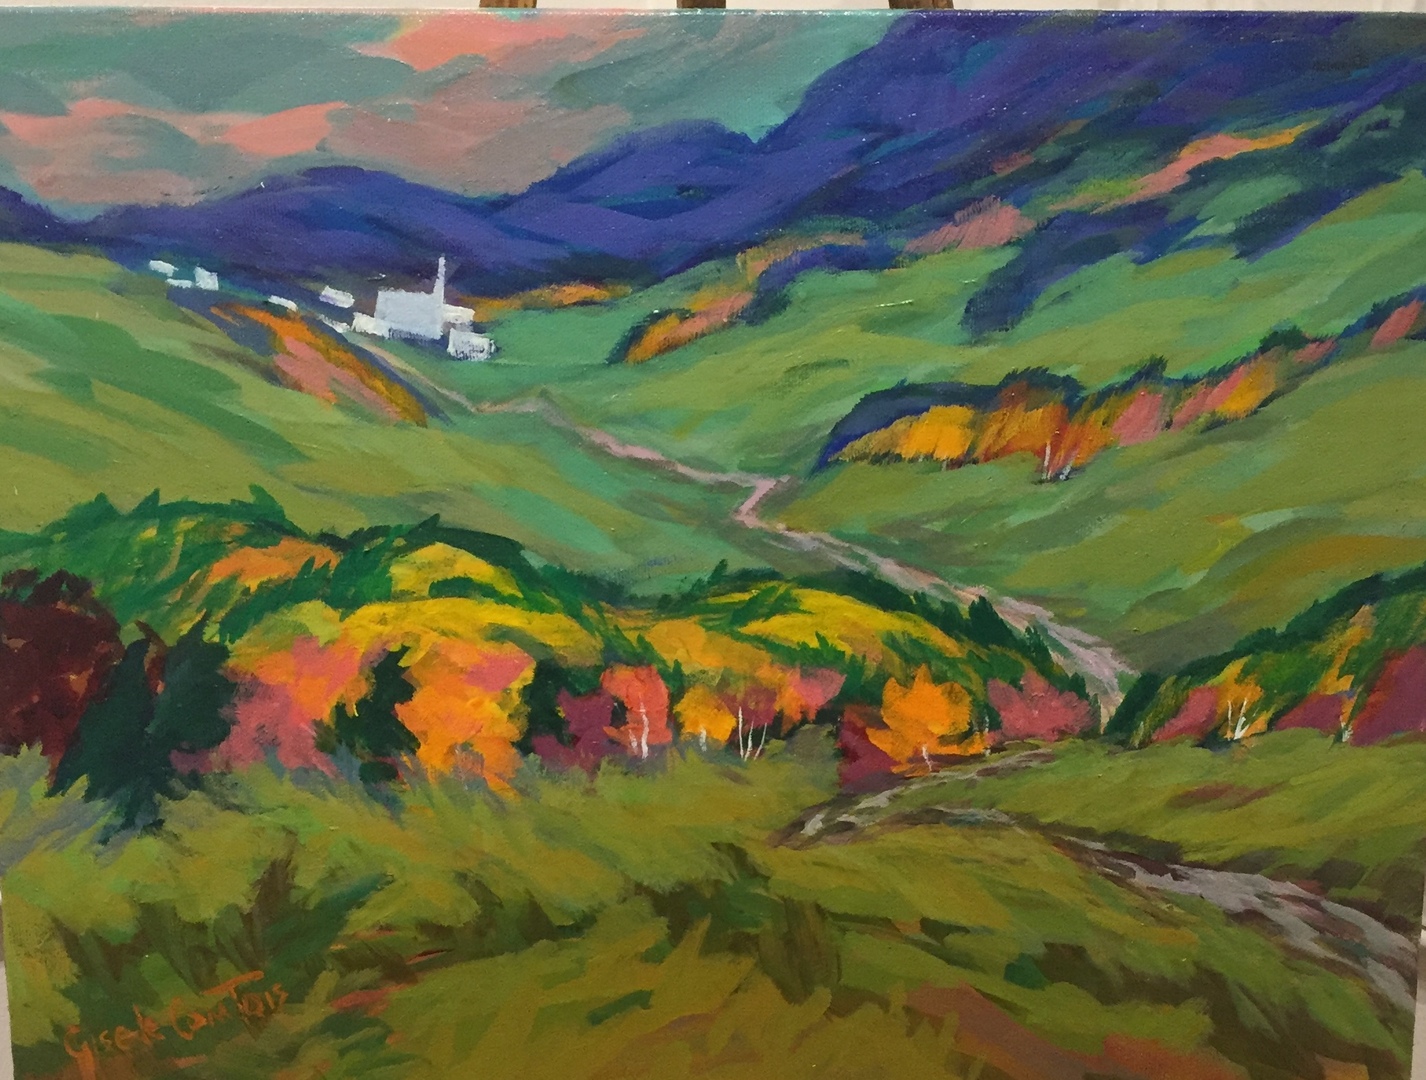 Iron Hill - 12 x 16 inches wide - $2100